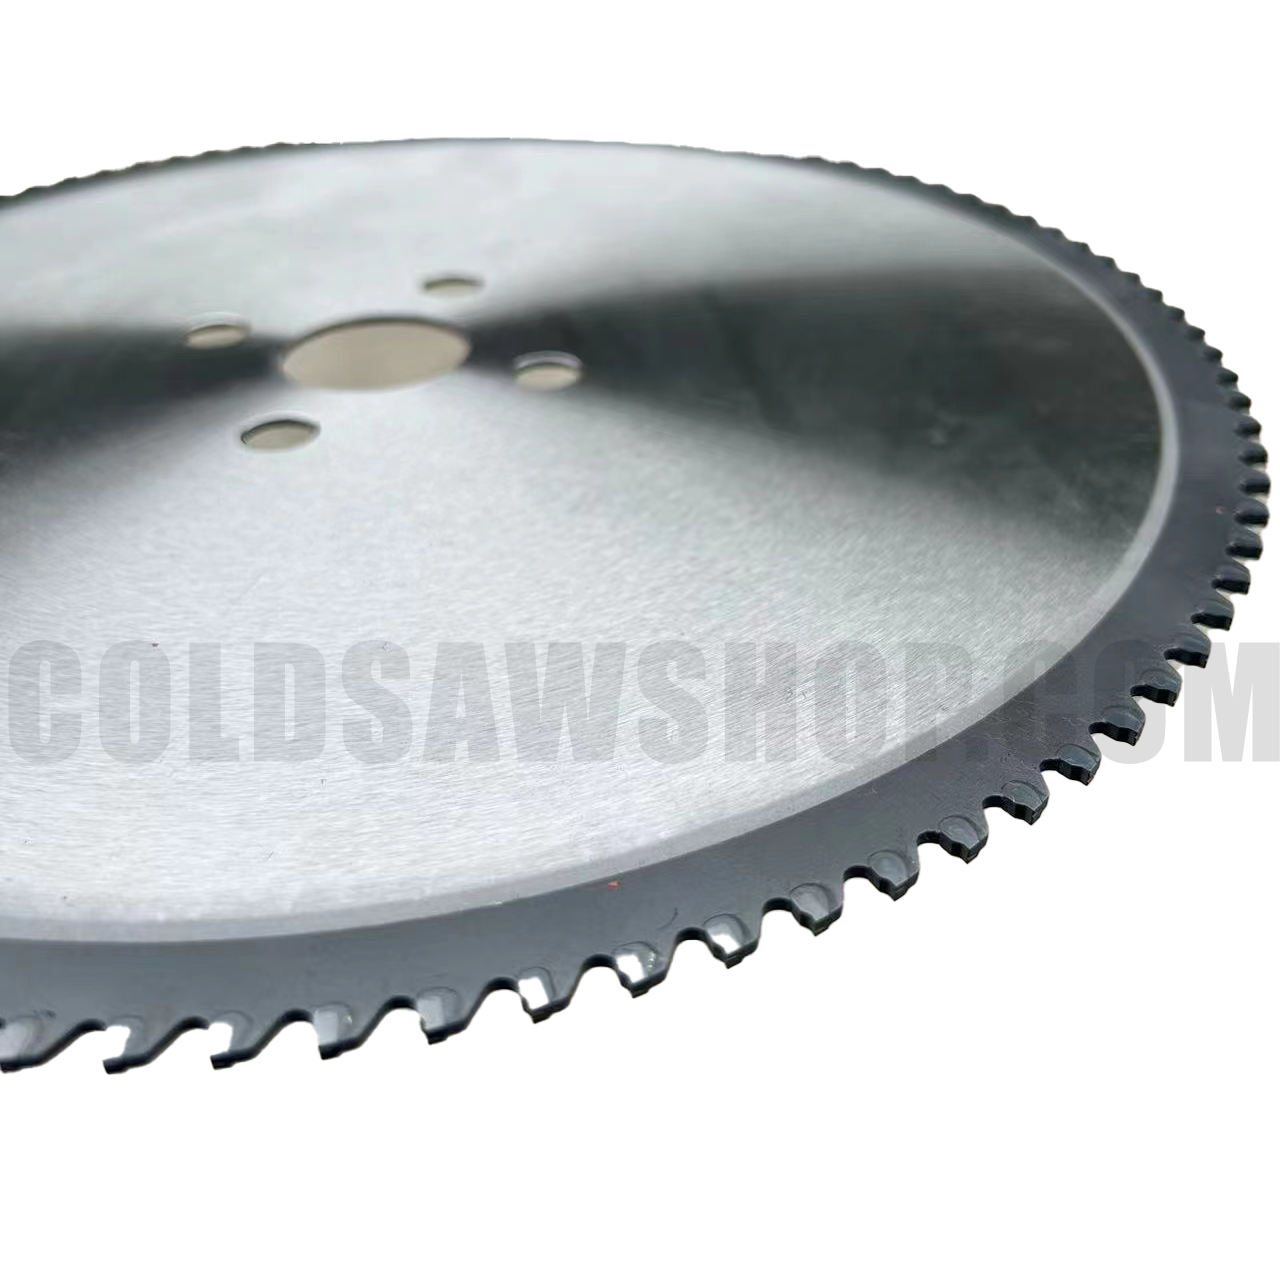 315 x 2.25/2.00 x 40 Cold Saw Blade - Cermet Tipped